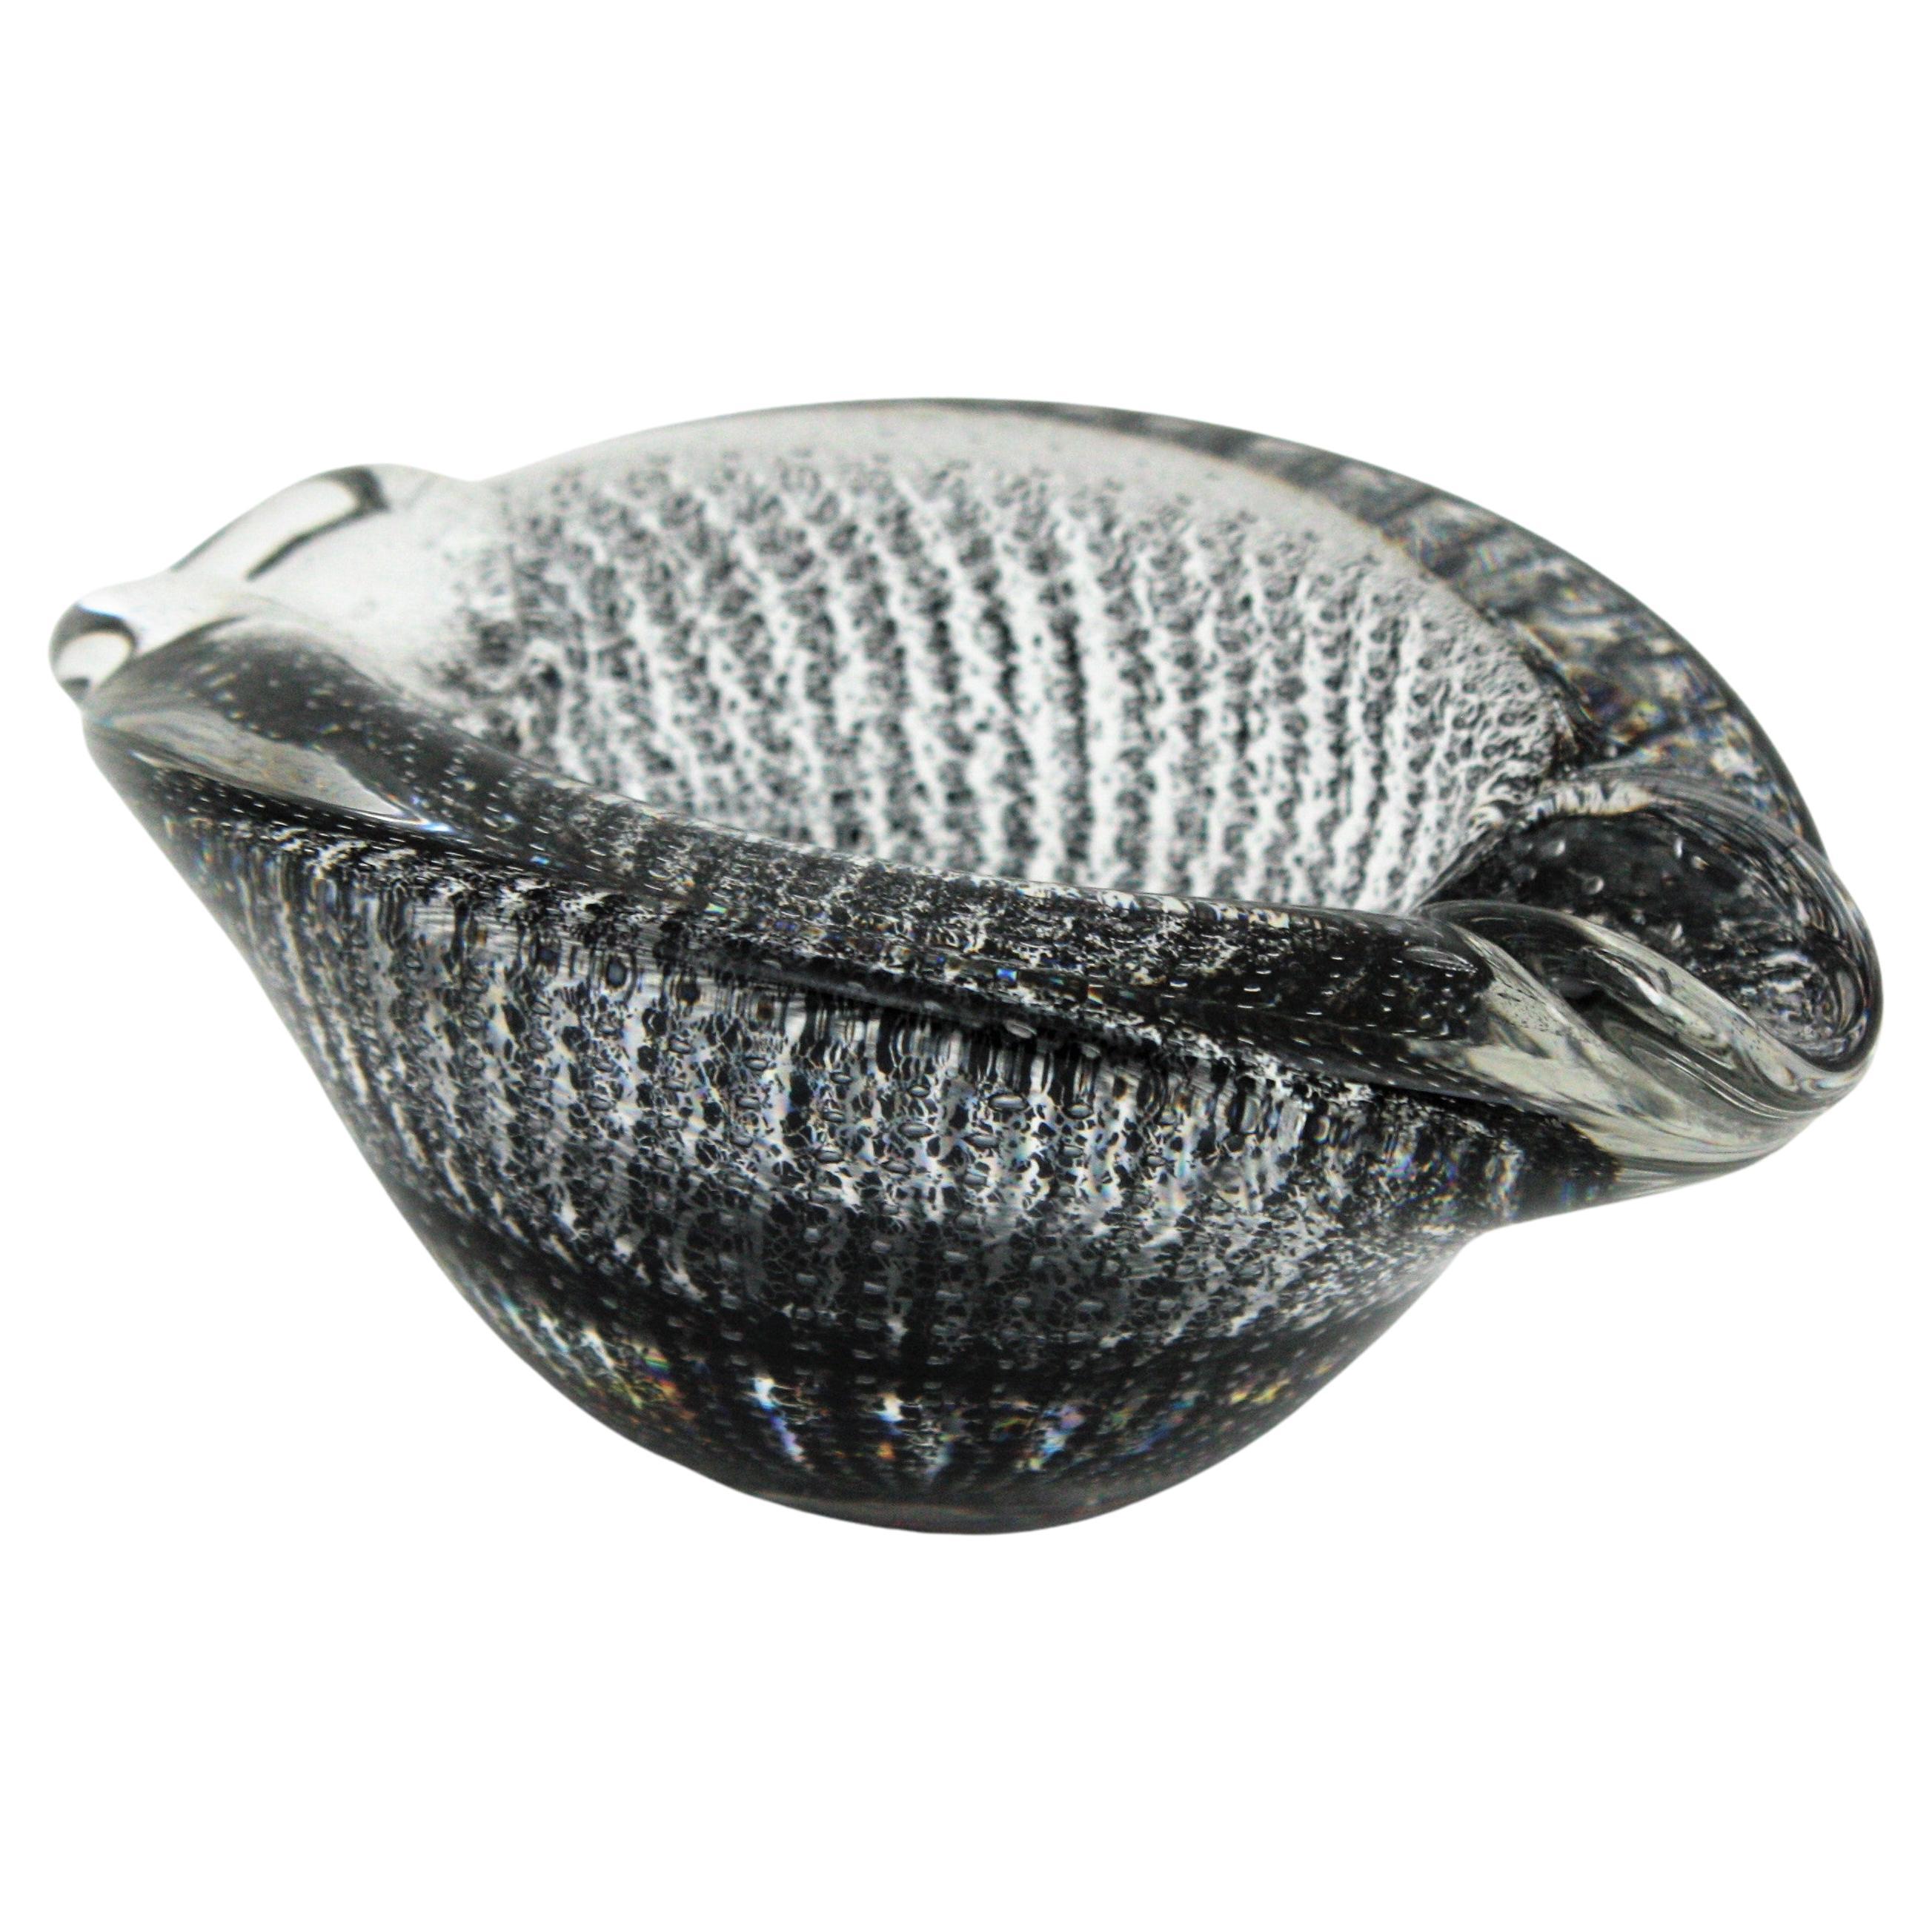 Striped Bullicante Murano clear glass ashtray with black inclusions. Attributed to Archimede Seguso. Italy, 1950s.
This eye-catching Murano glass bowl or ashtray is made in clear glass with black flecks and controlled air bubbles. The black